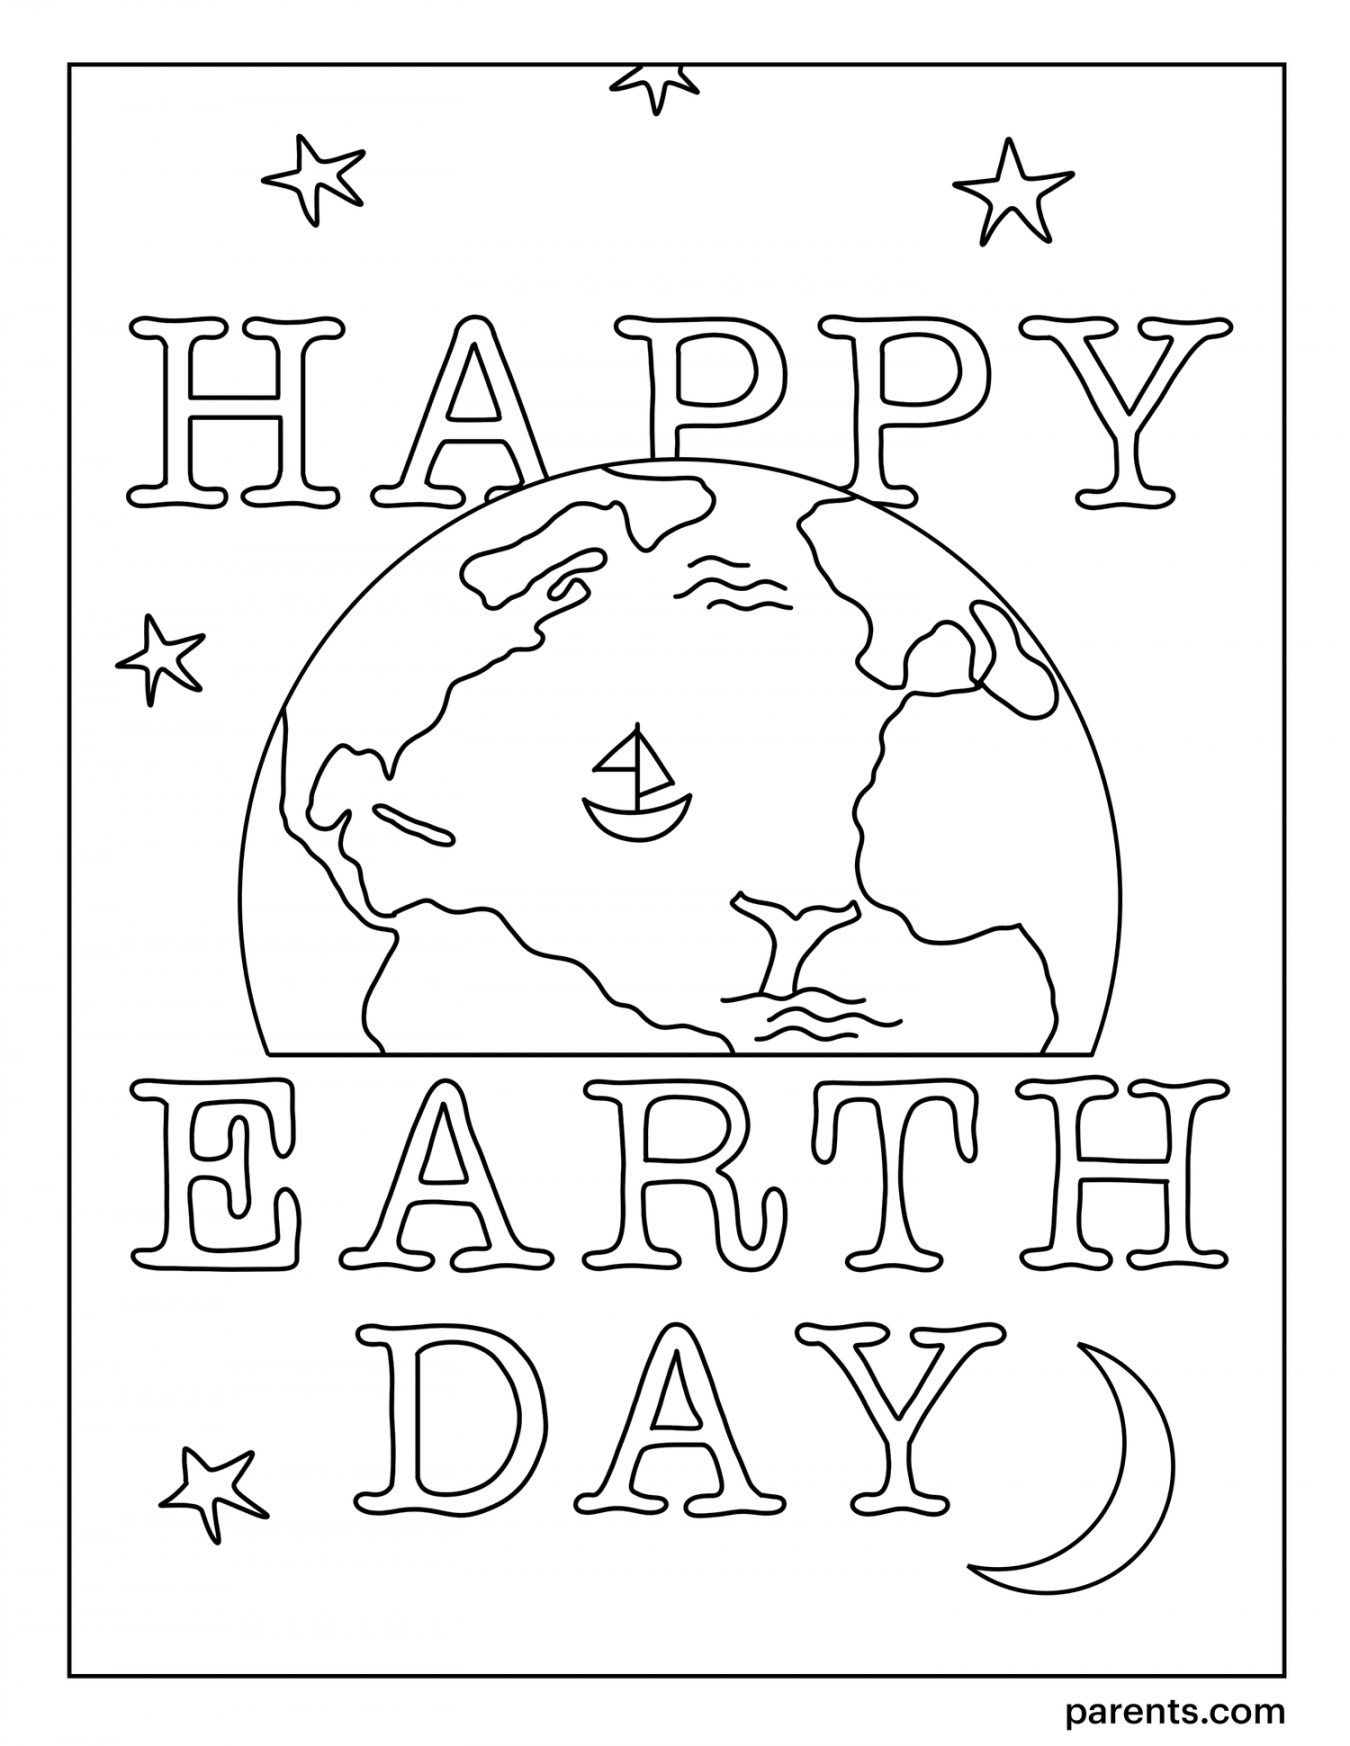 Free Earth Day Coloring Pages for Kids - FREE Printables - Earth Day Coloring Pages Free Printable